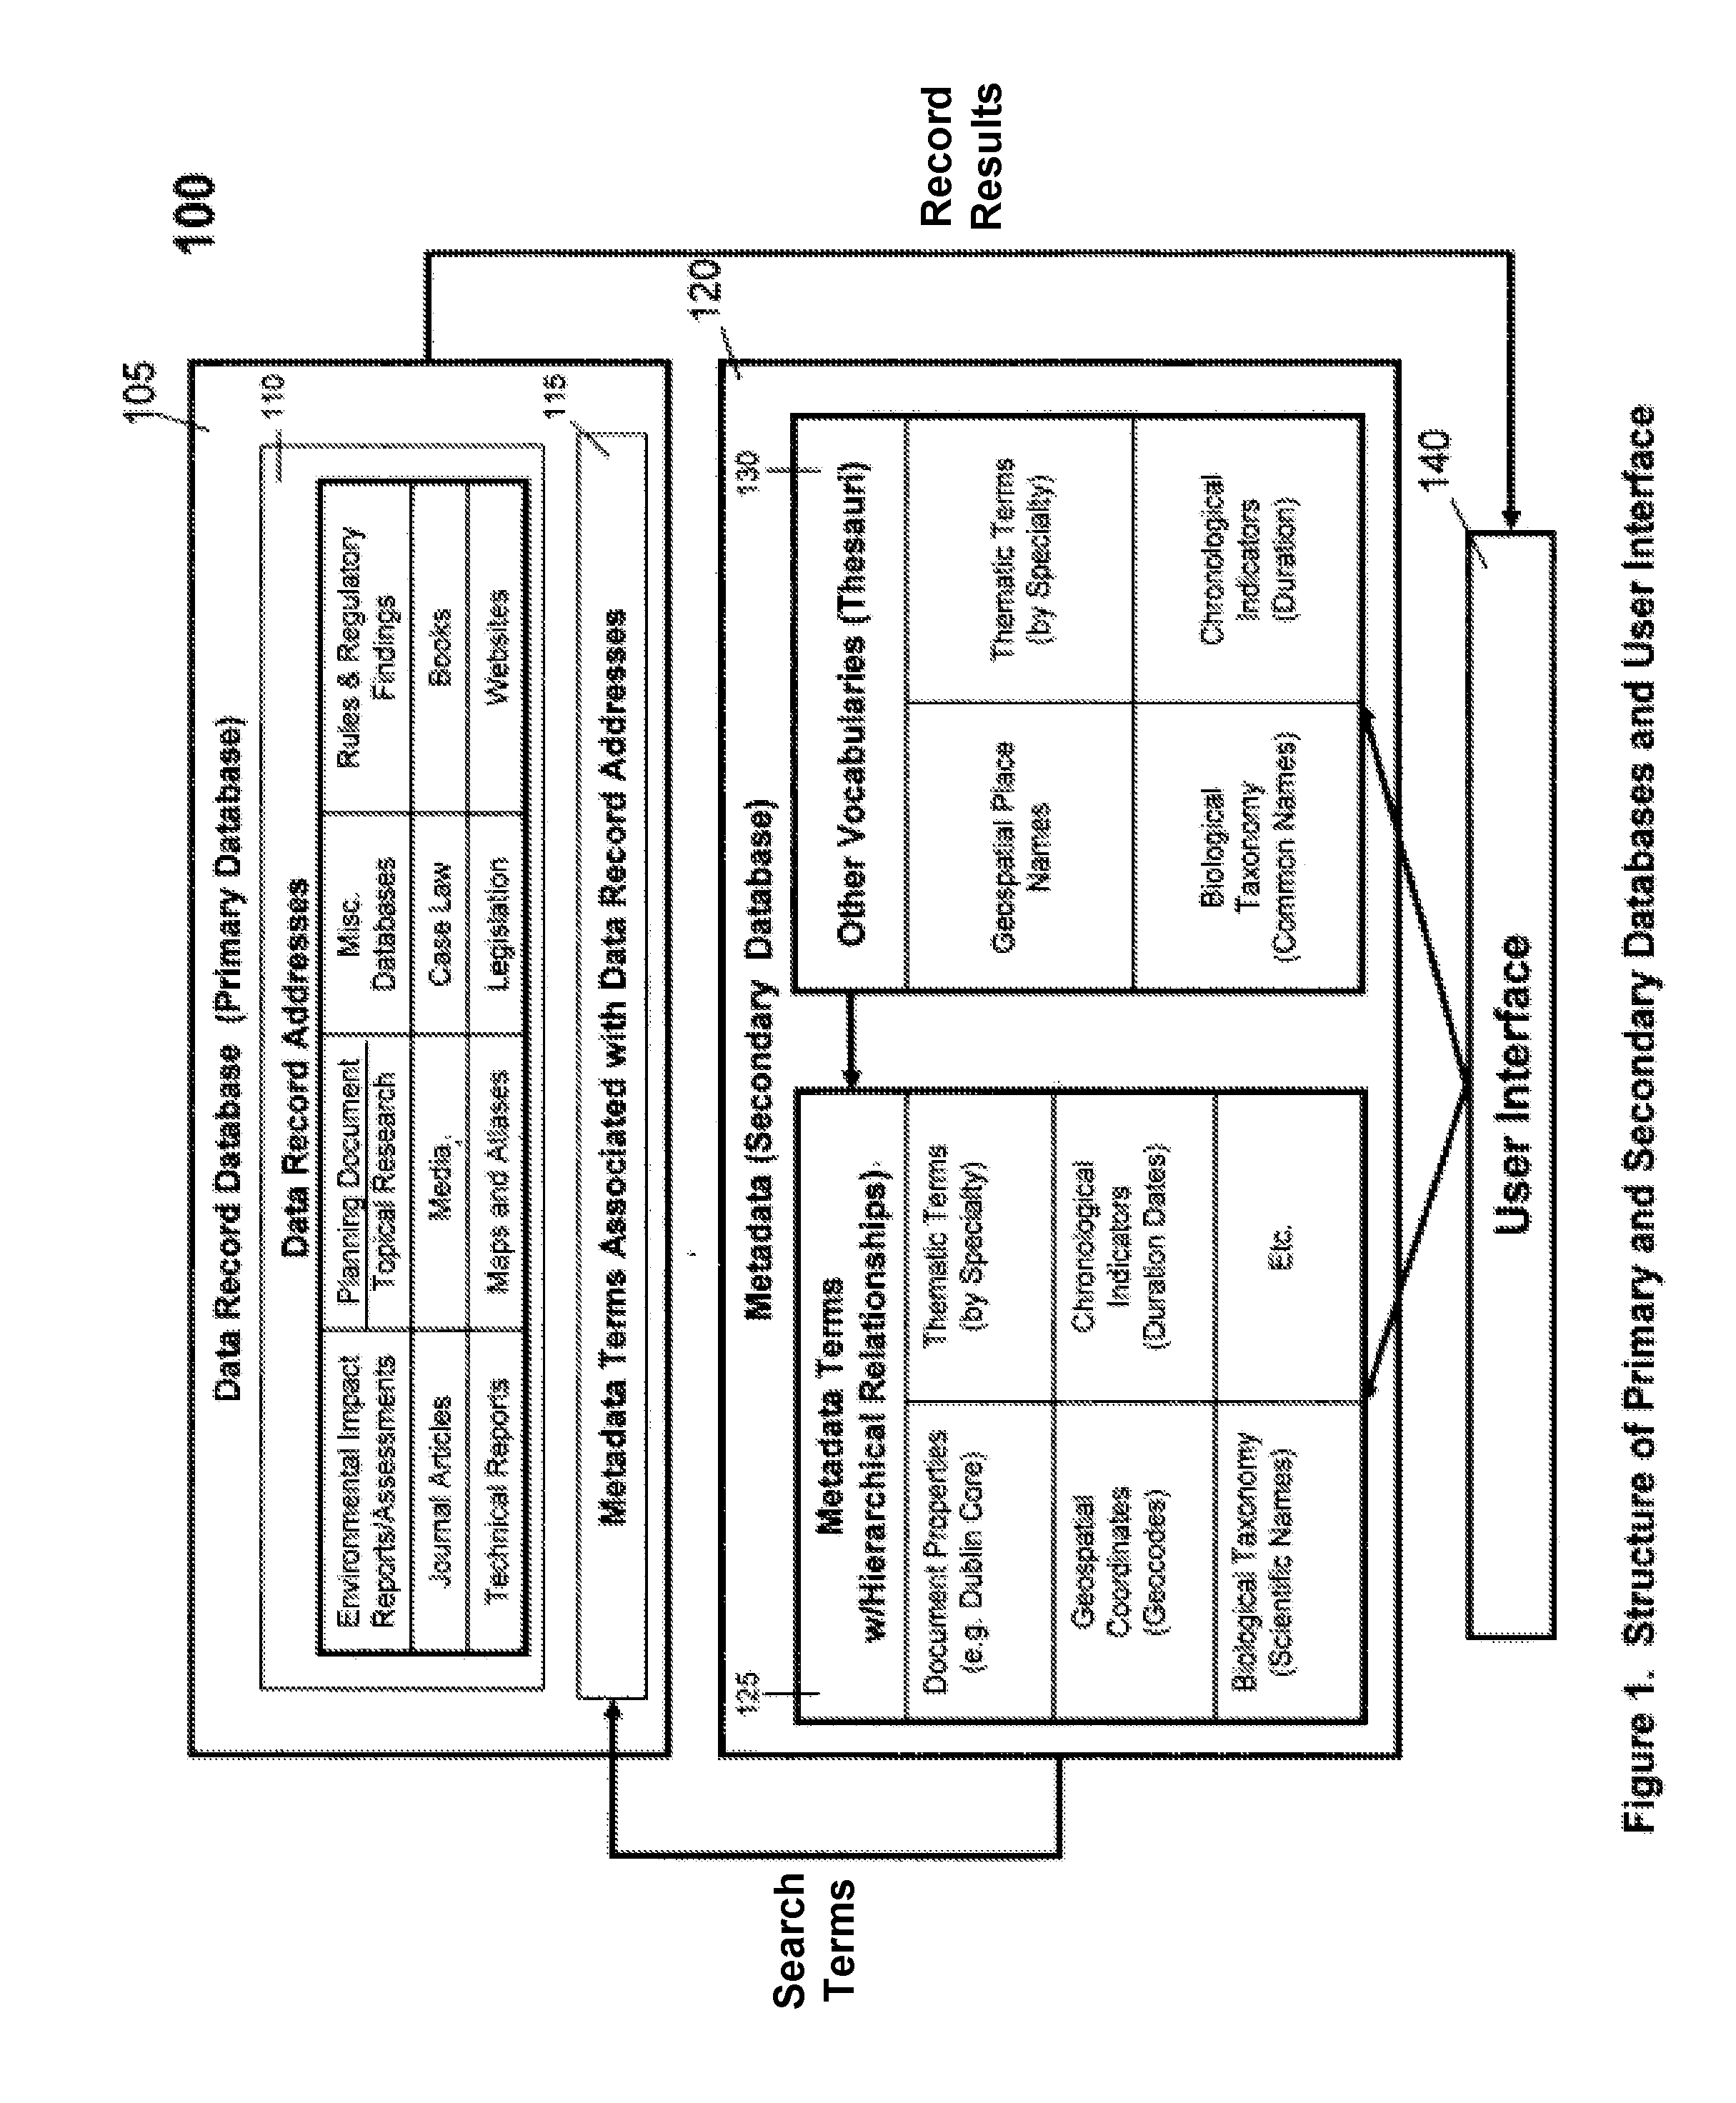 System and method for indexing, organizing, storing and retrieving environmental information